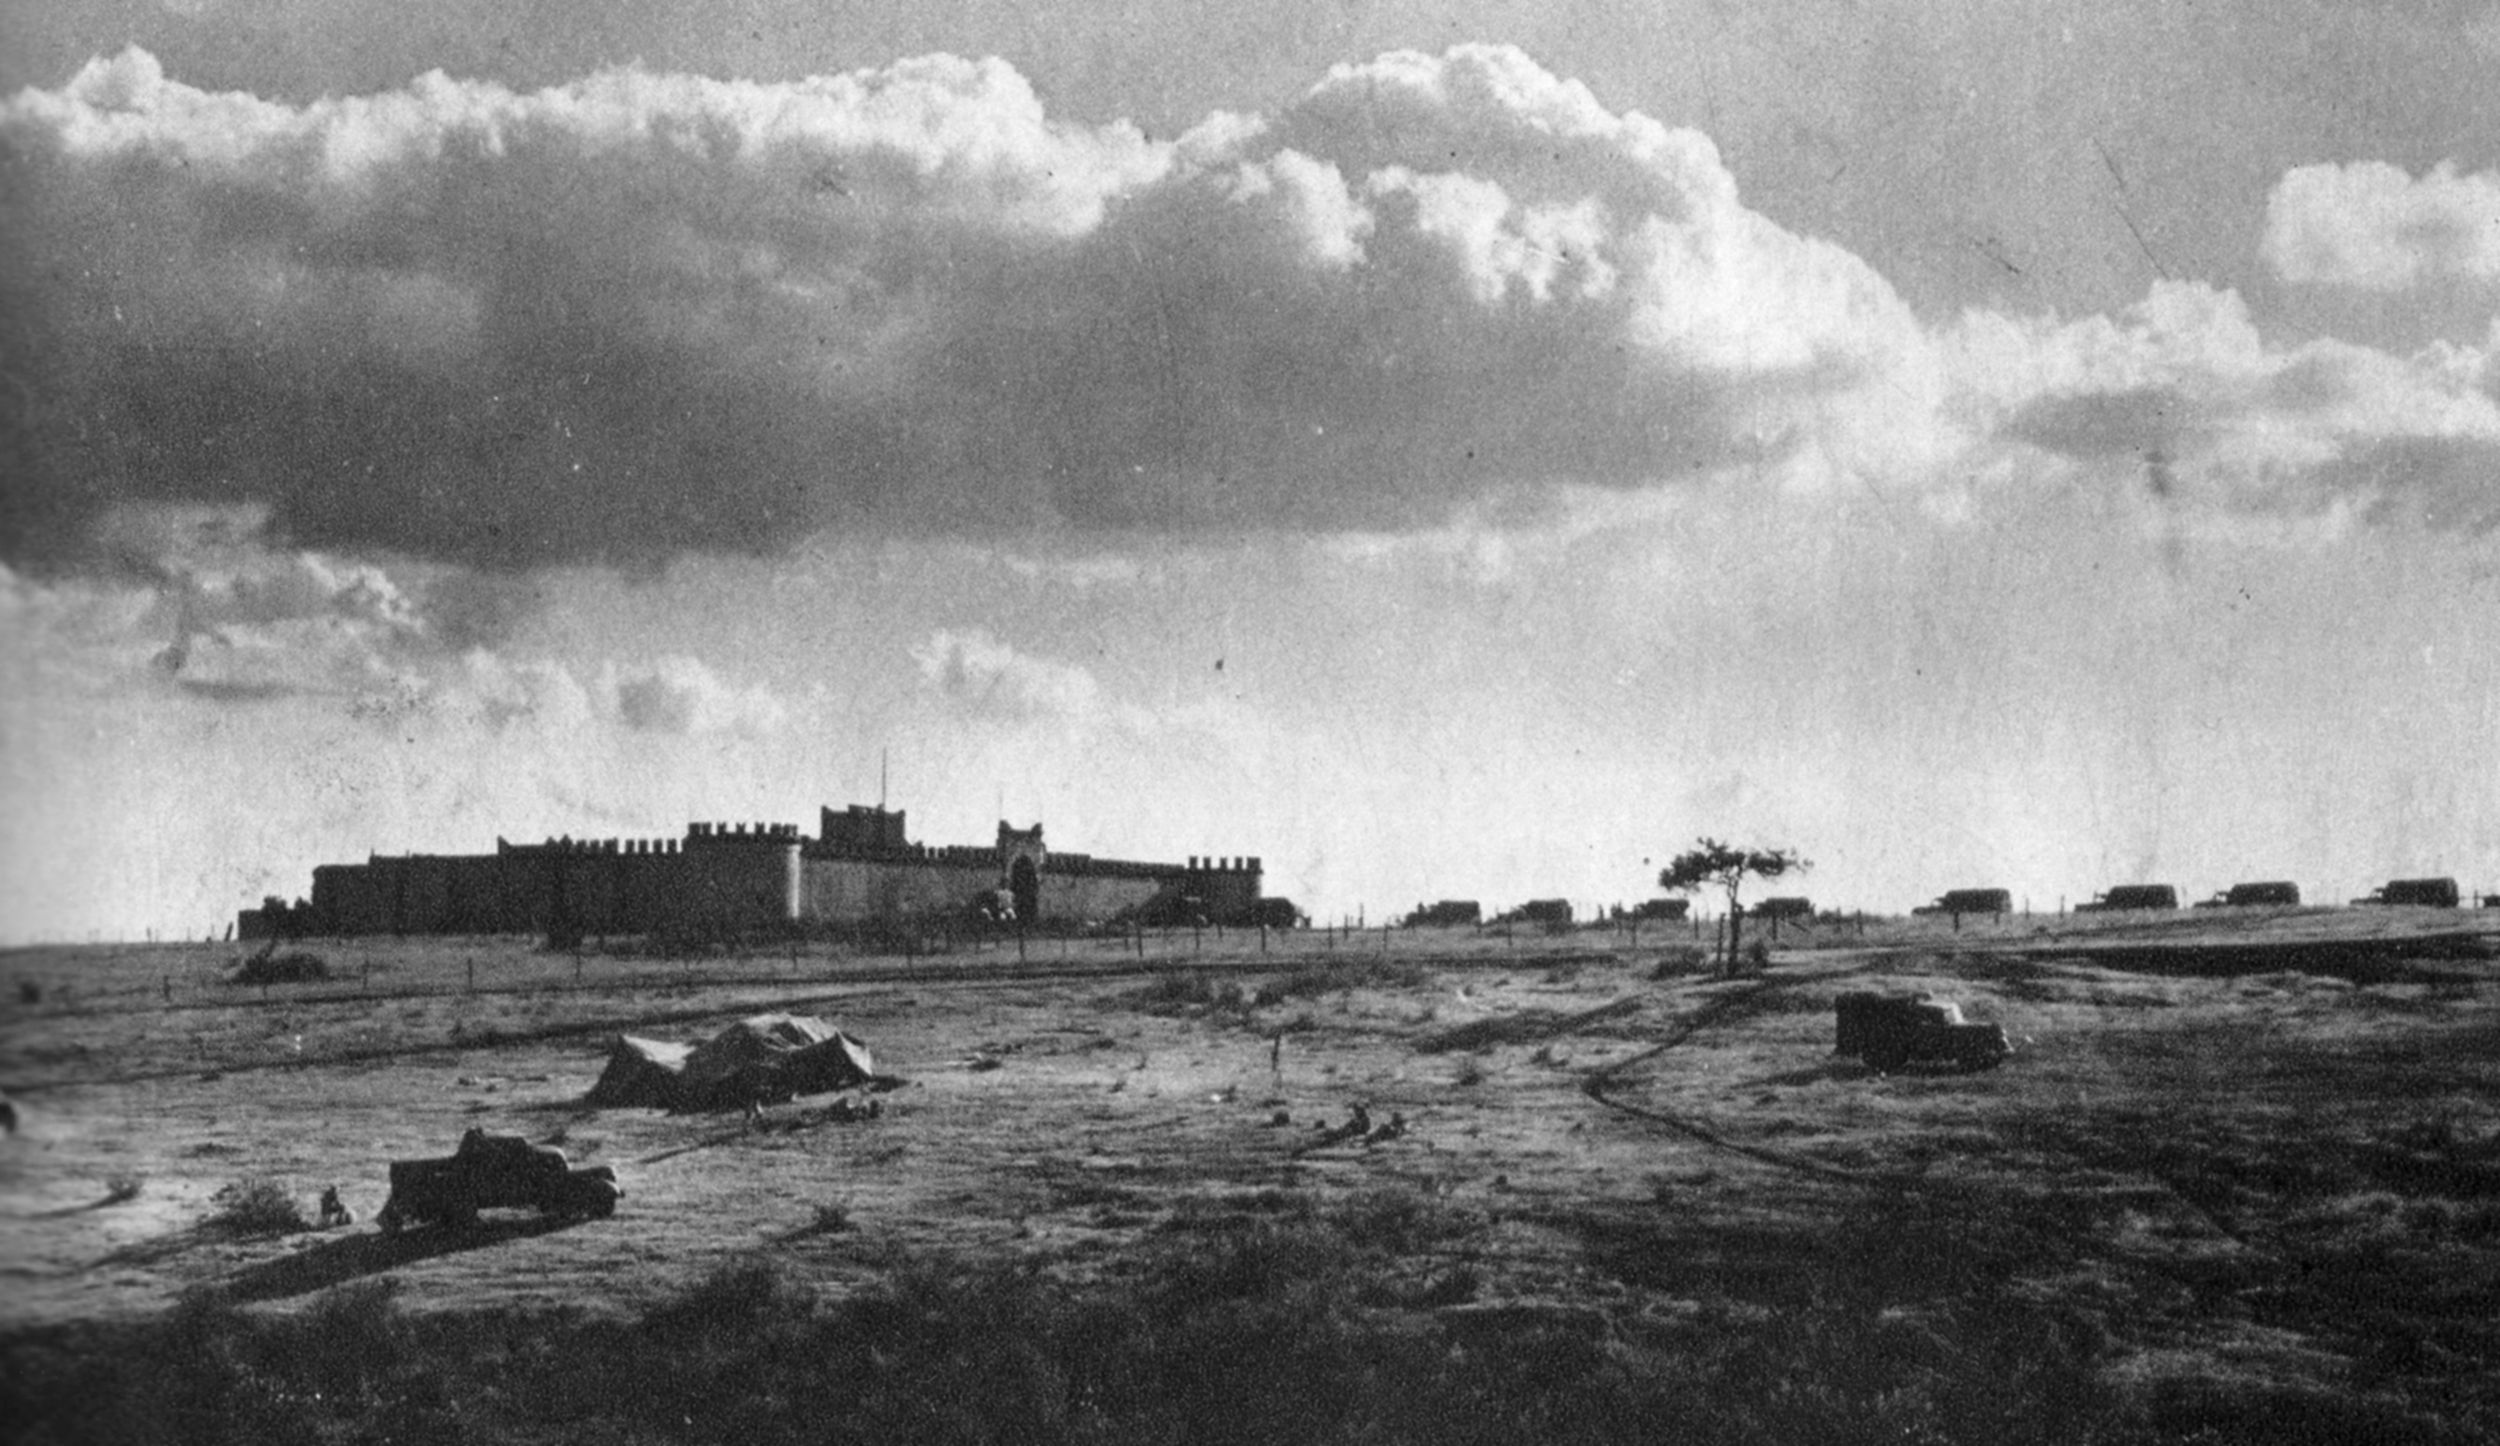 The Italian stronghold of Mega Fort in southern Ethiopia lies temporarily quiet prior to an attack by the South African 1st Division in 1941. Fascist Italy suffered a serious blow to its prestige with the loss of its East African holdings.